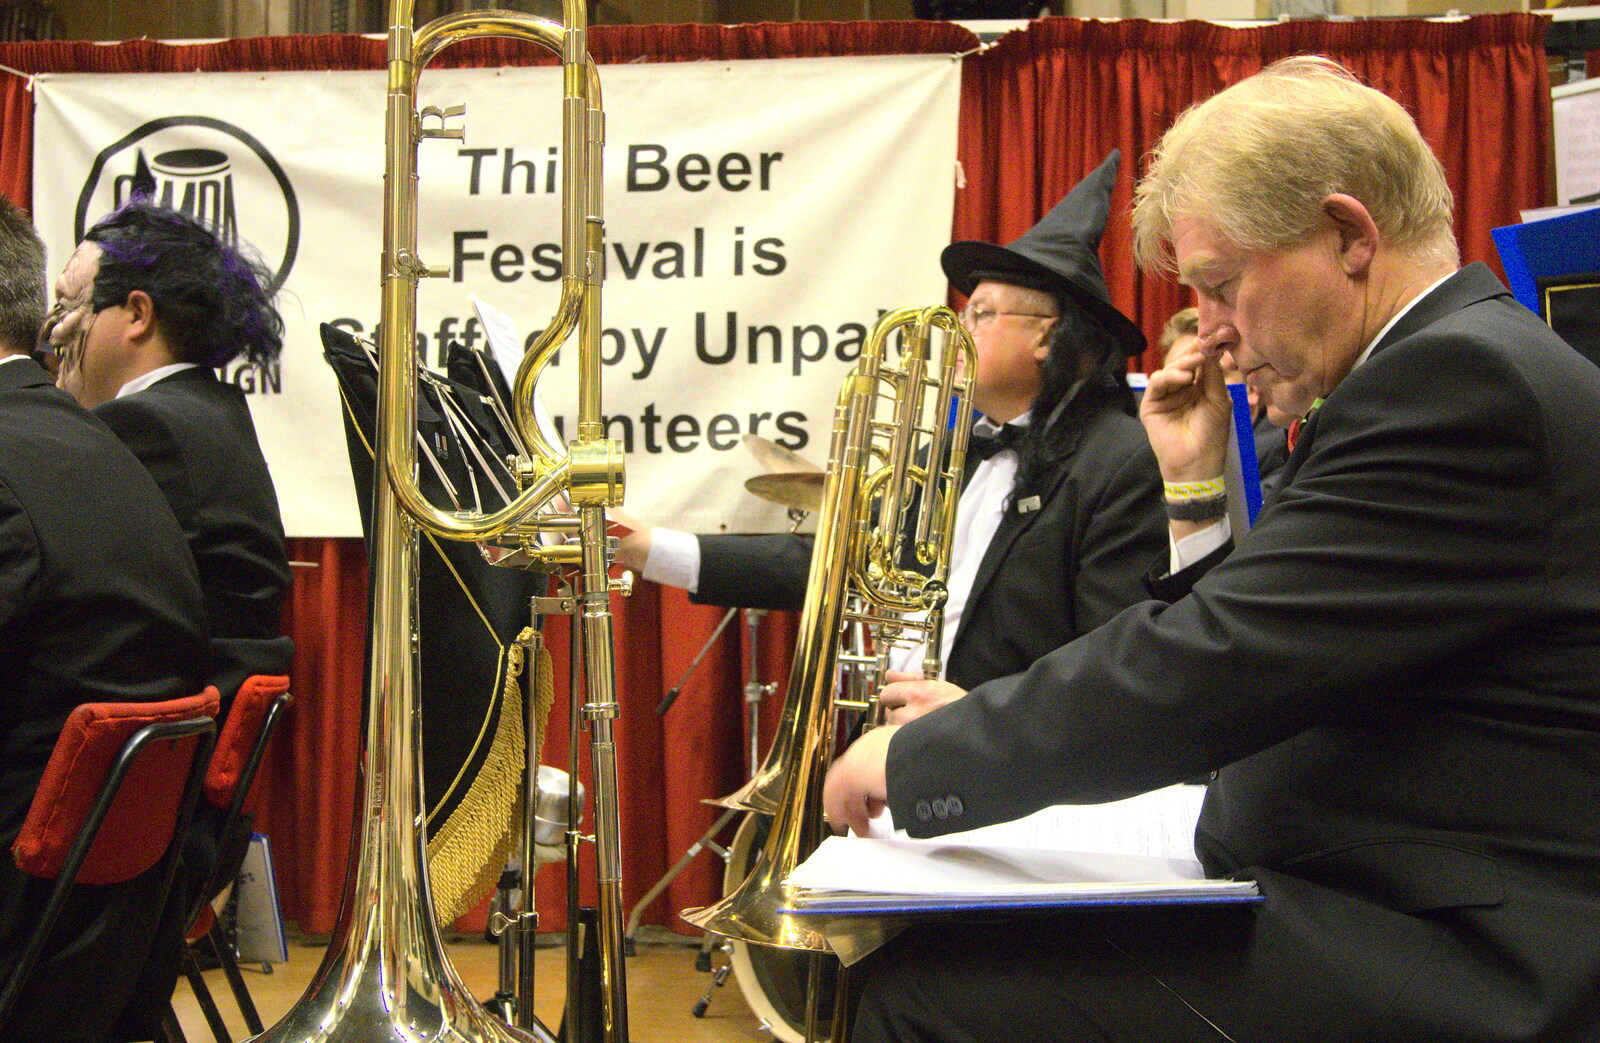 A bass trombone from The 35th Norwich Beer Festival, St. Andrew's Hall, Norwich - 31st October 2012